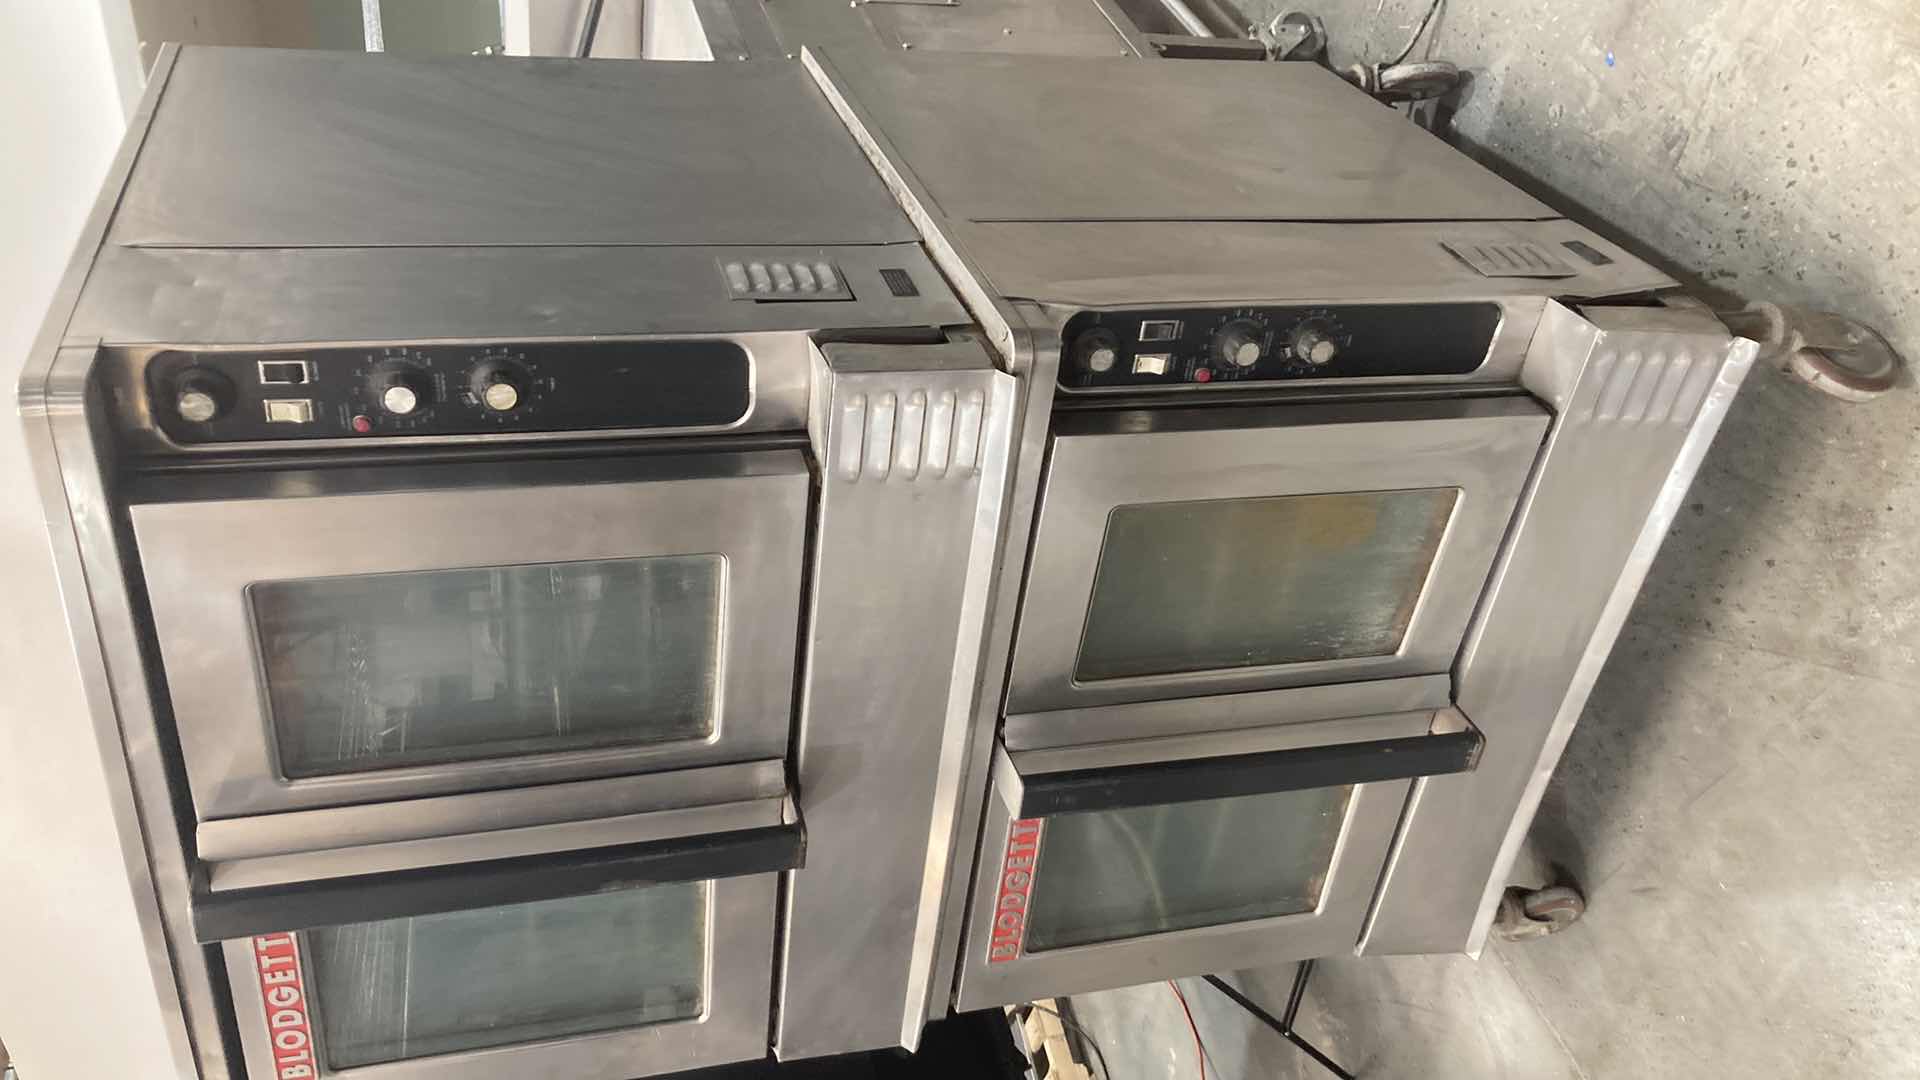 Photo 2 of BLODGETT 2 TIER COMMERCIAL CONVECTION OVEN (ELECTRICAL SHORT)